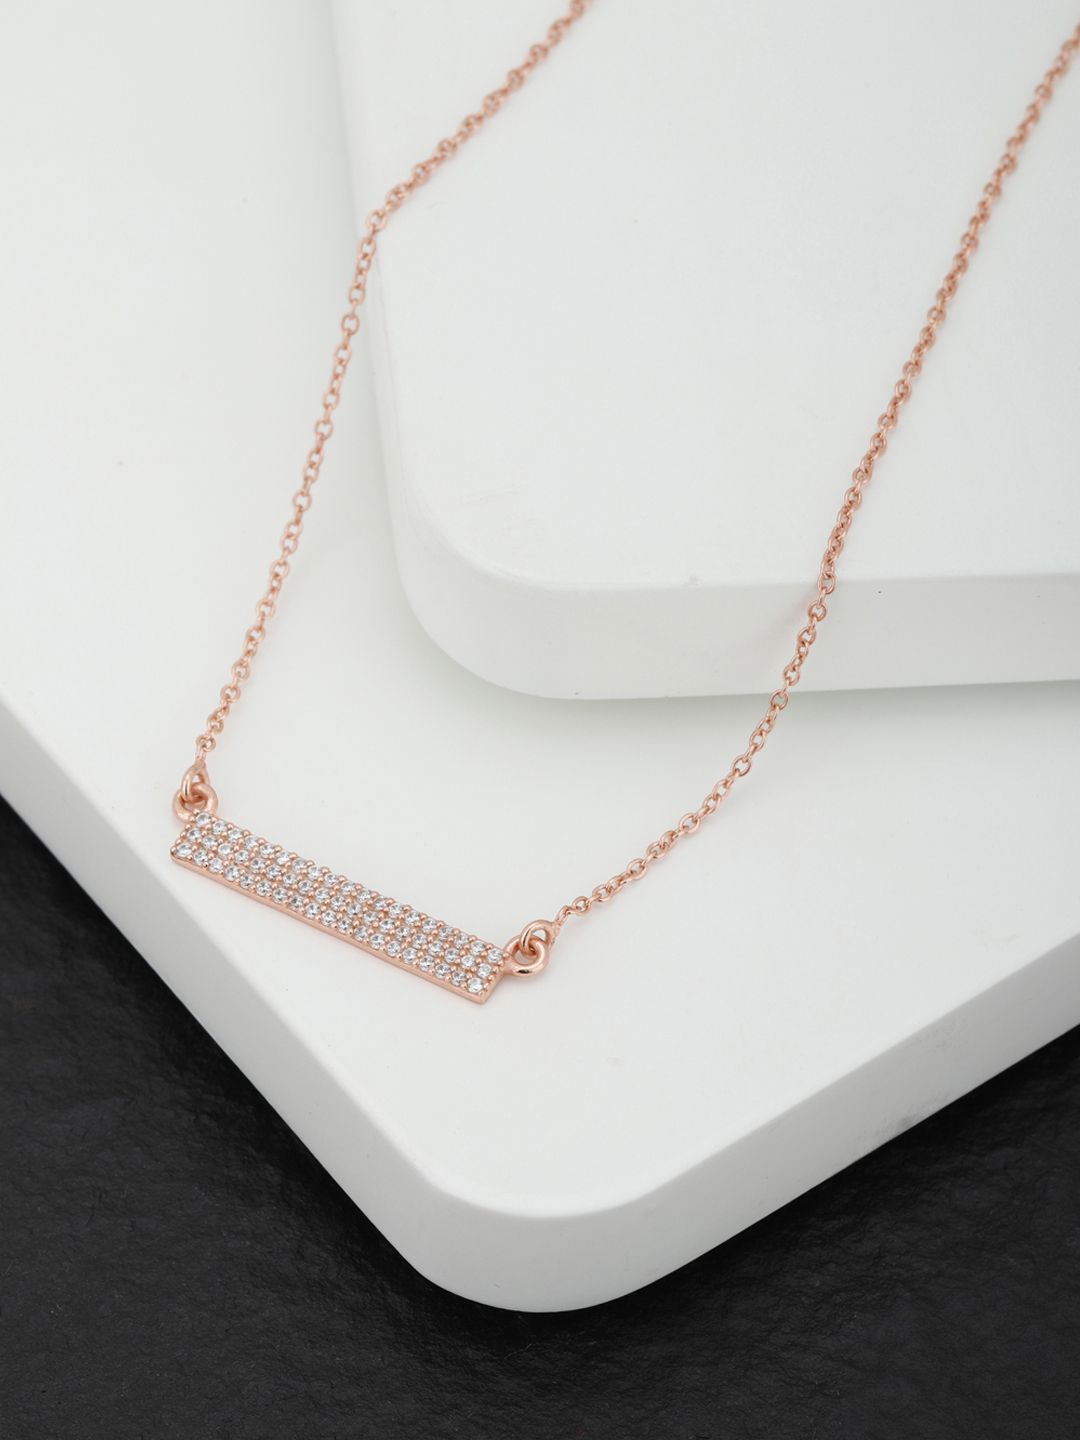 Carlton London Rose Gold-Toned Rhodium-Plated CZ-Studded Minimal Necklace Price in India